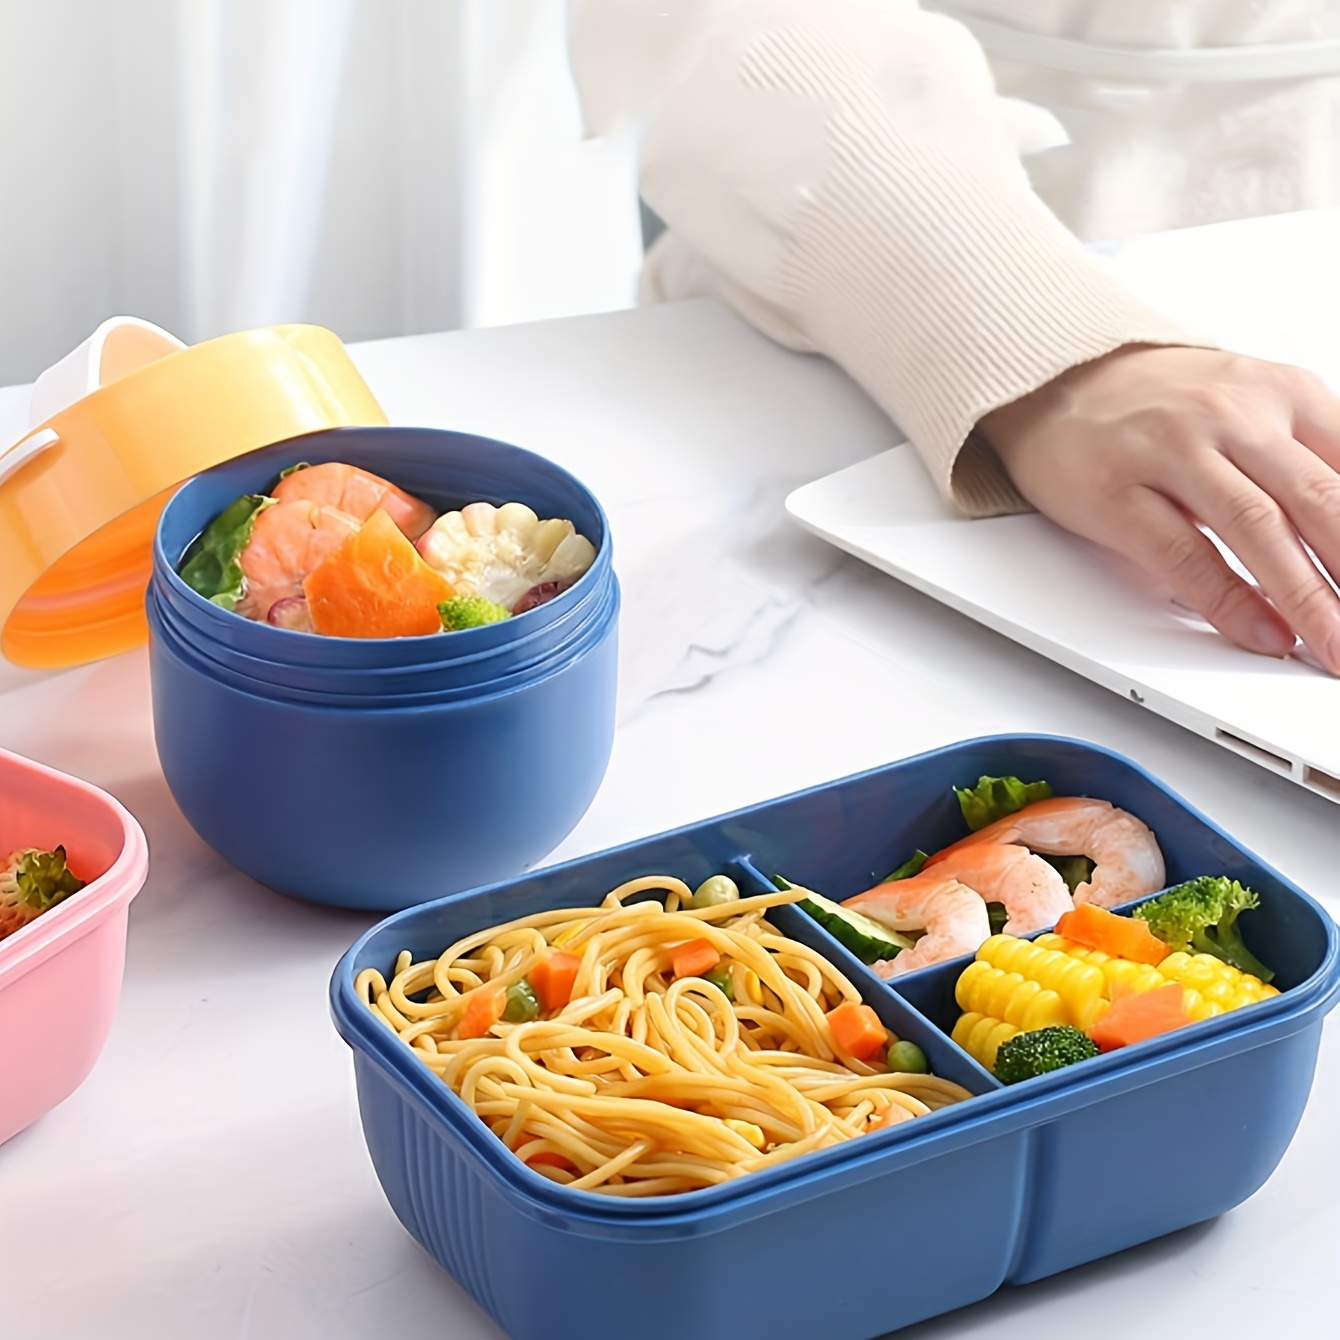 Bento Insulated Container 